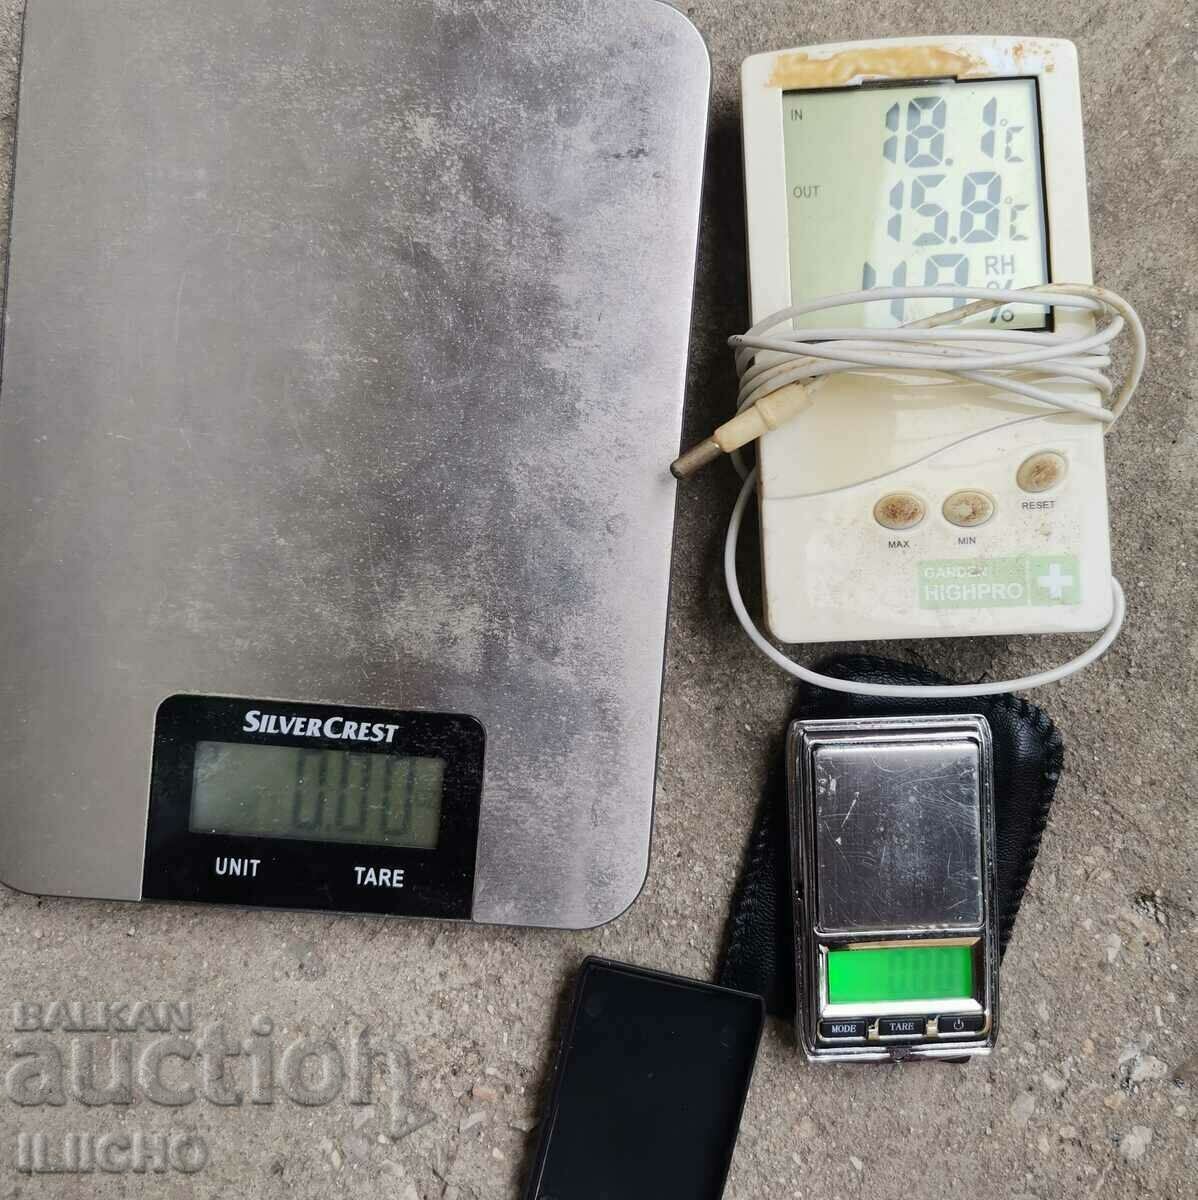 2 pcs. scales + thermometer